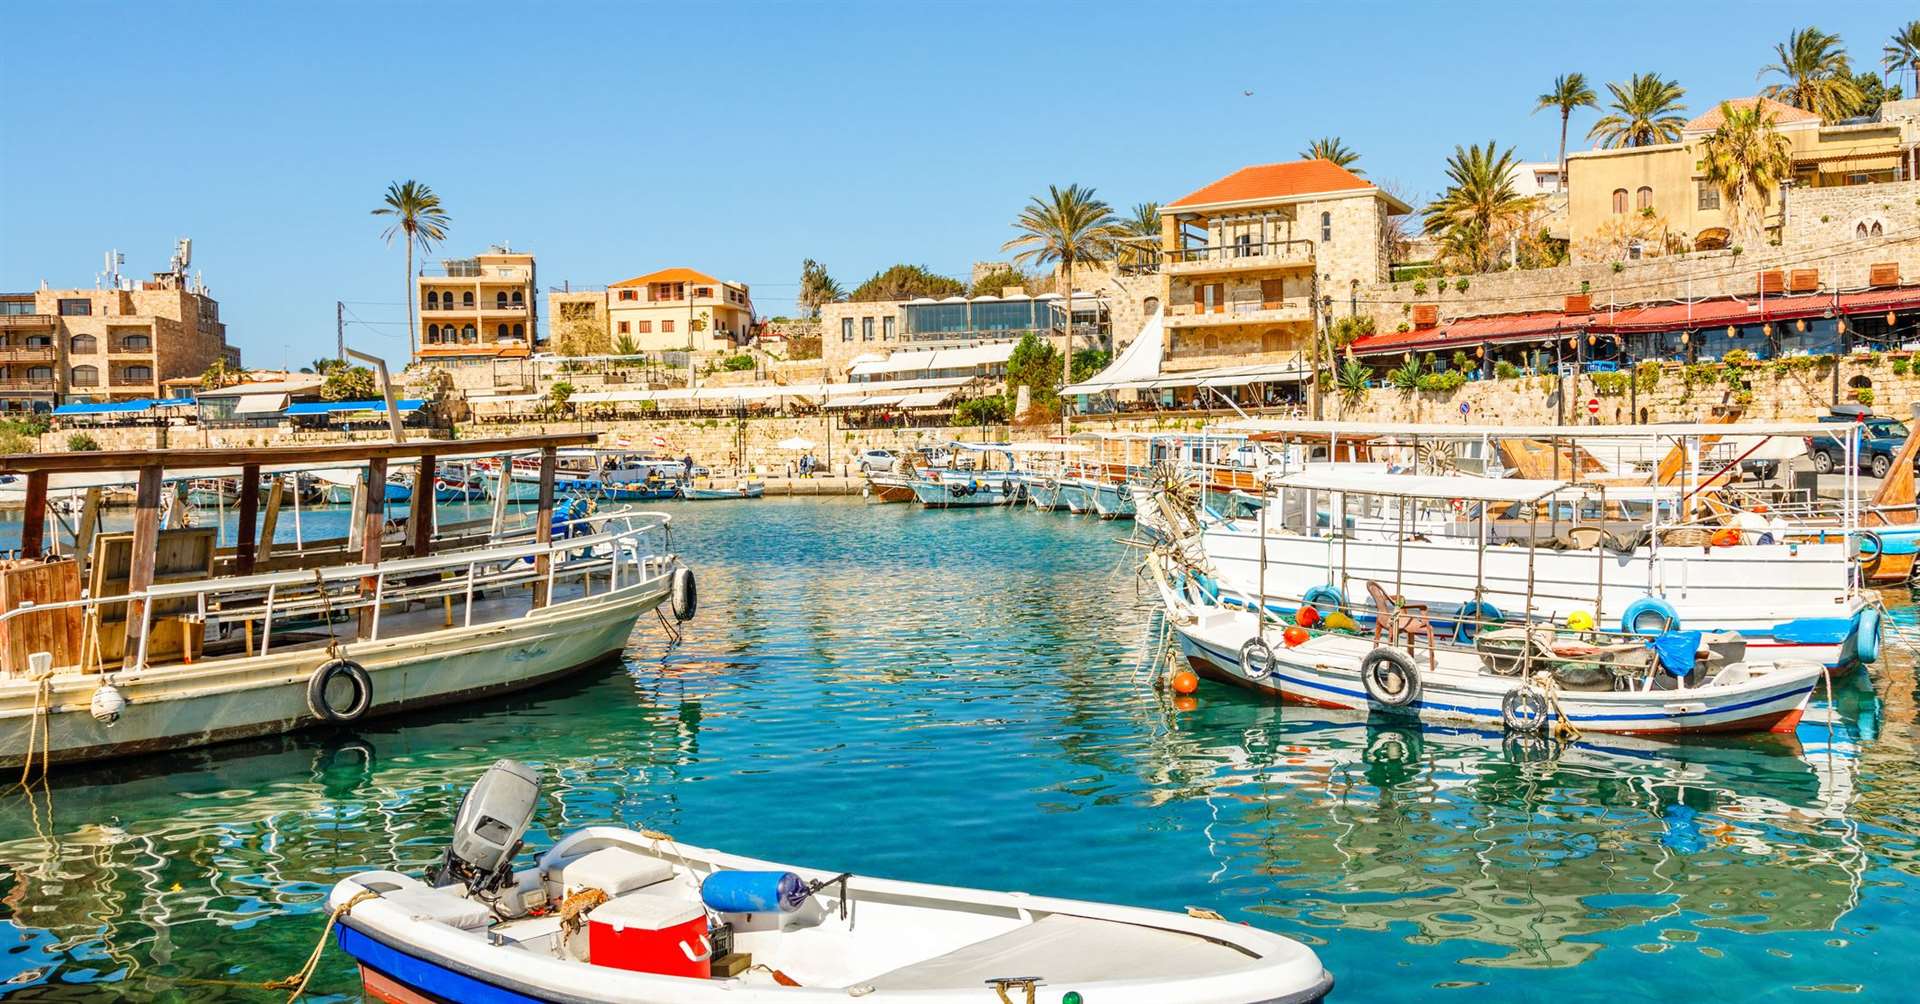 Byblos in Lebanon is said to be one of the oldest continuously inhabited cities in the world.